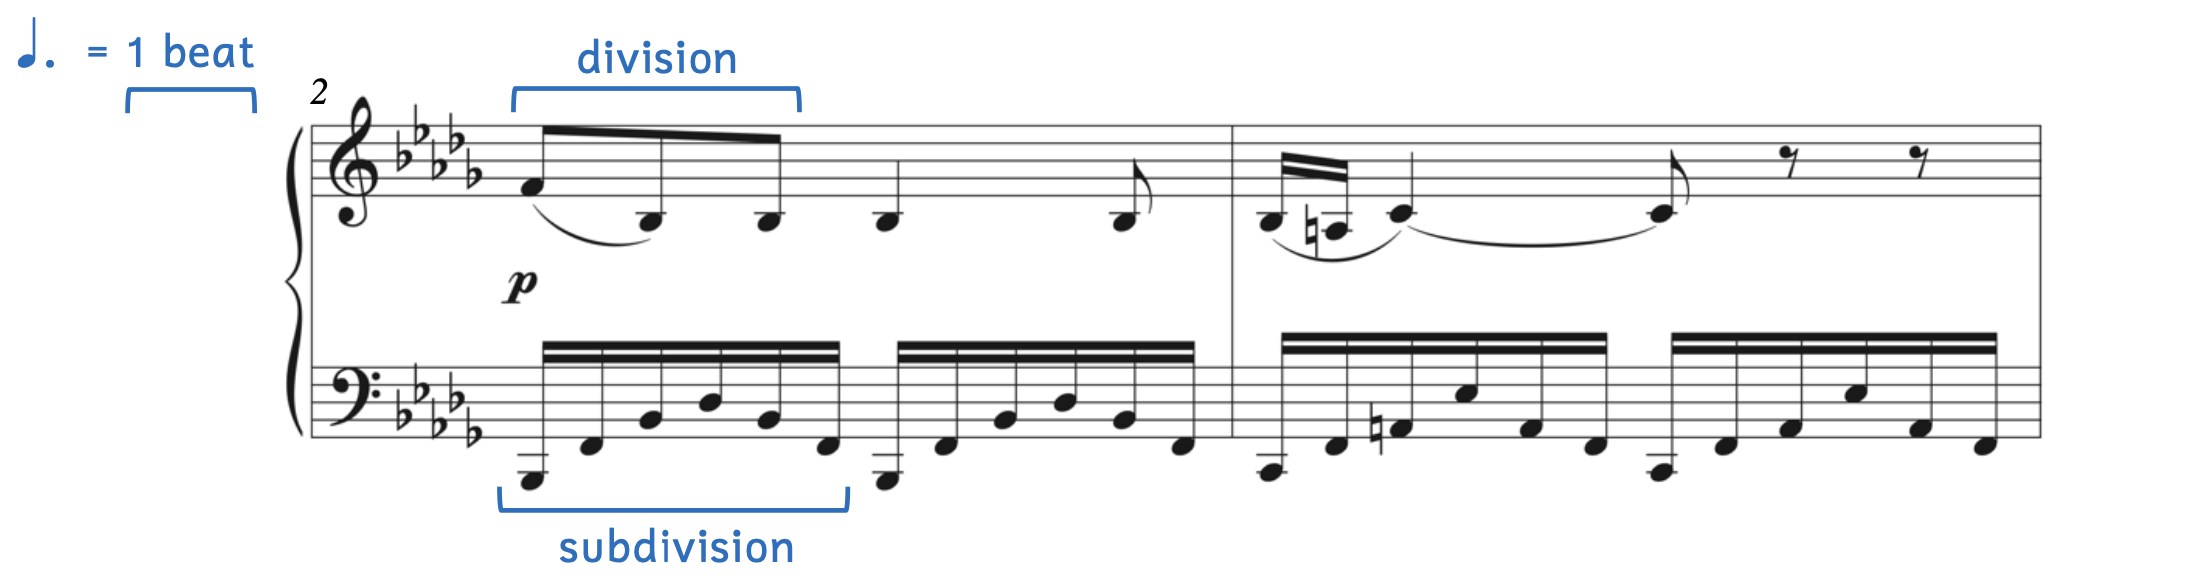 Example from Donizetti's “Una furtiva lagrima". A dotted quarter note equals one beat. The division of 3 eighth notes appears at the start of the example in the treble clef and the subdivision of 6 sixteenth notes appears at the start of the example in the bass clef.